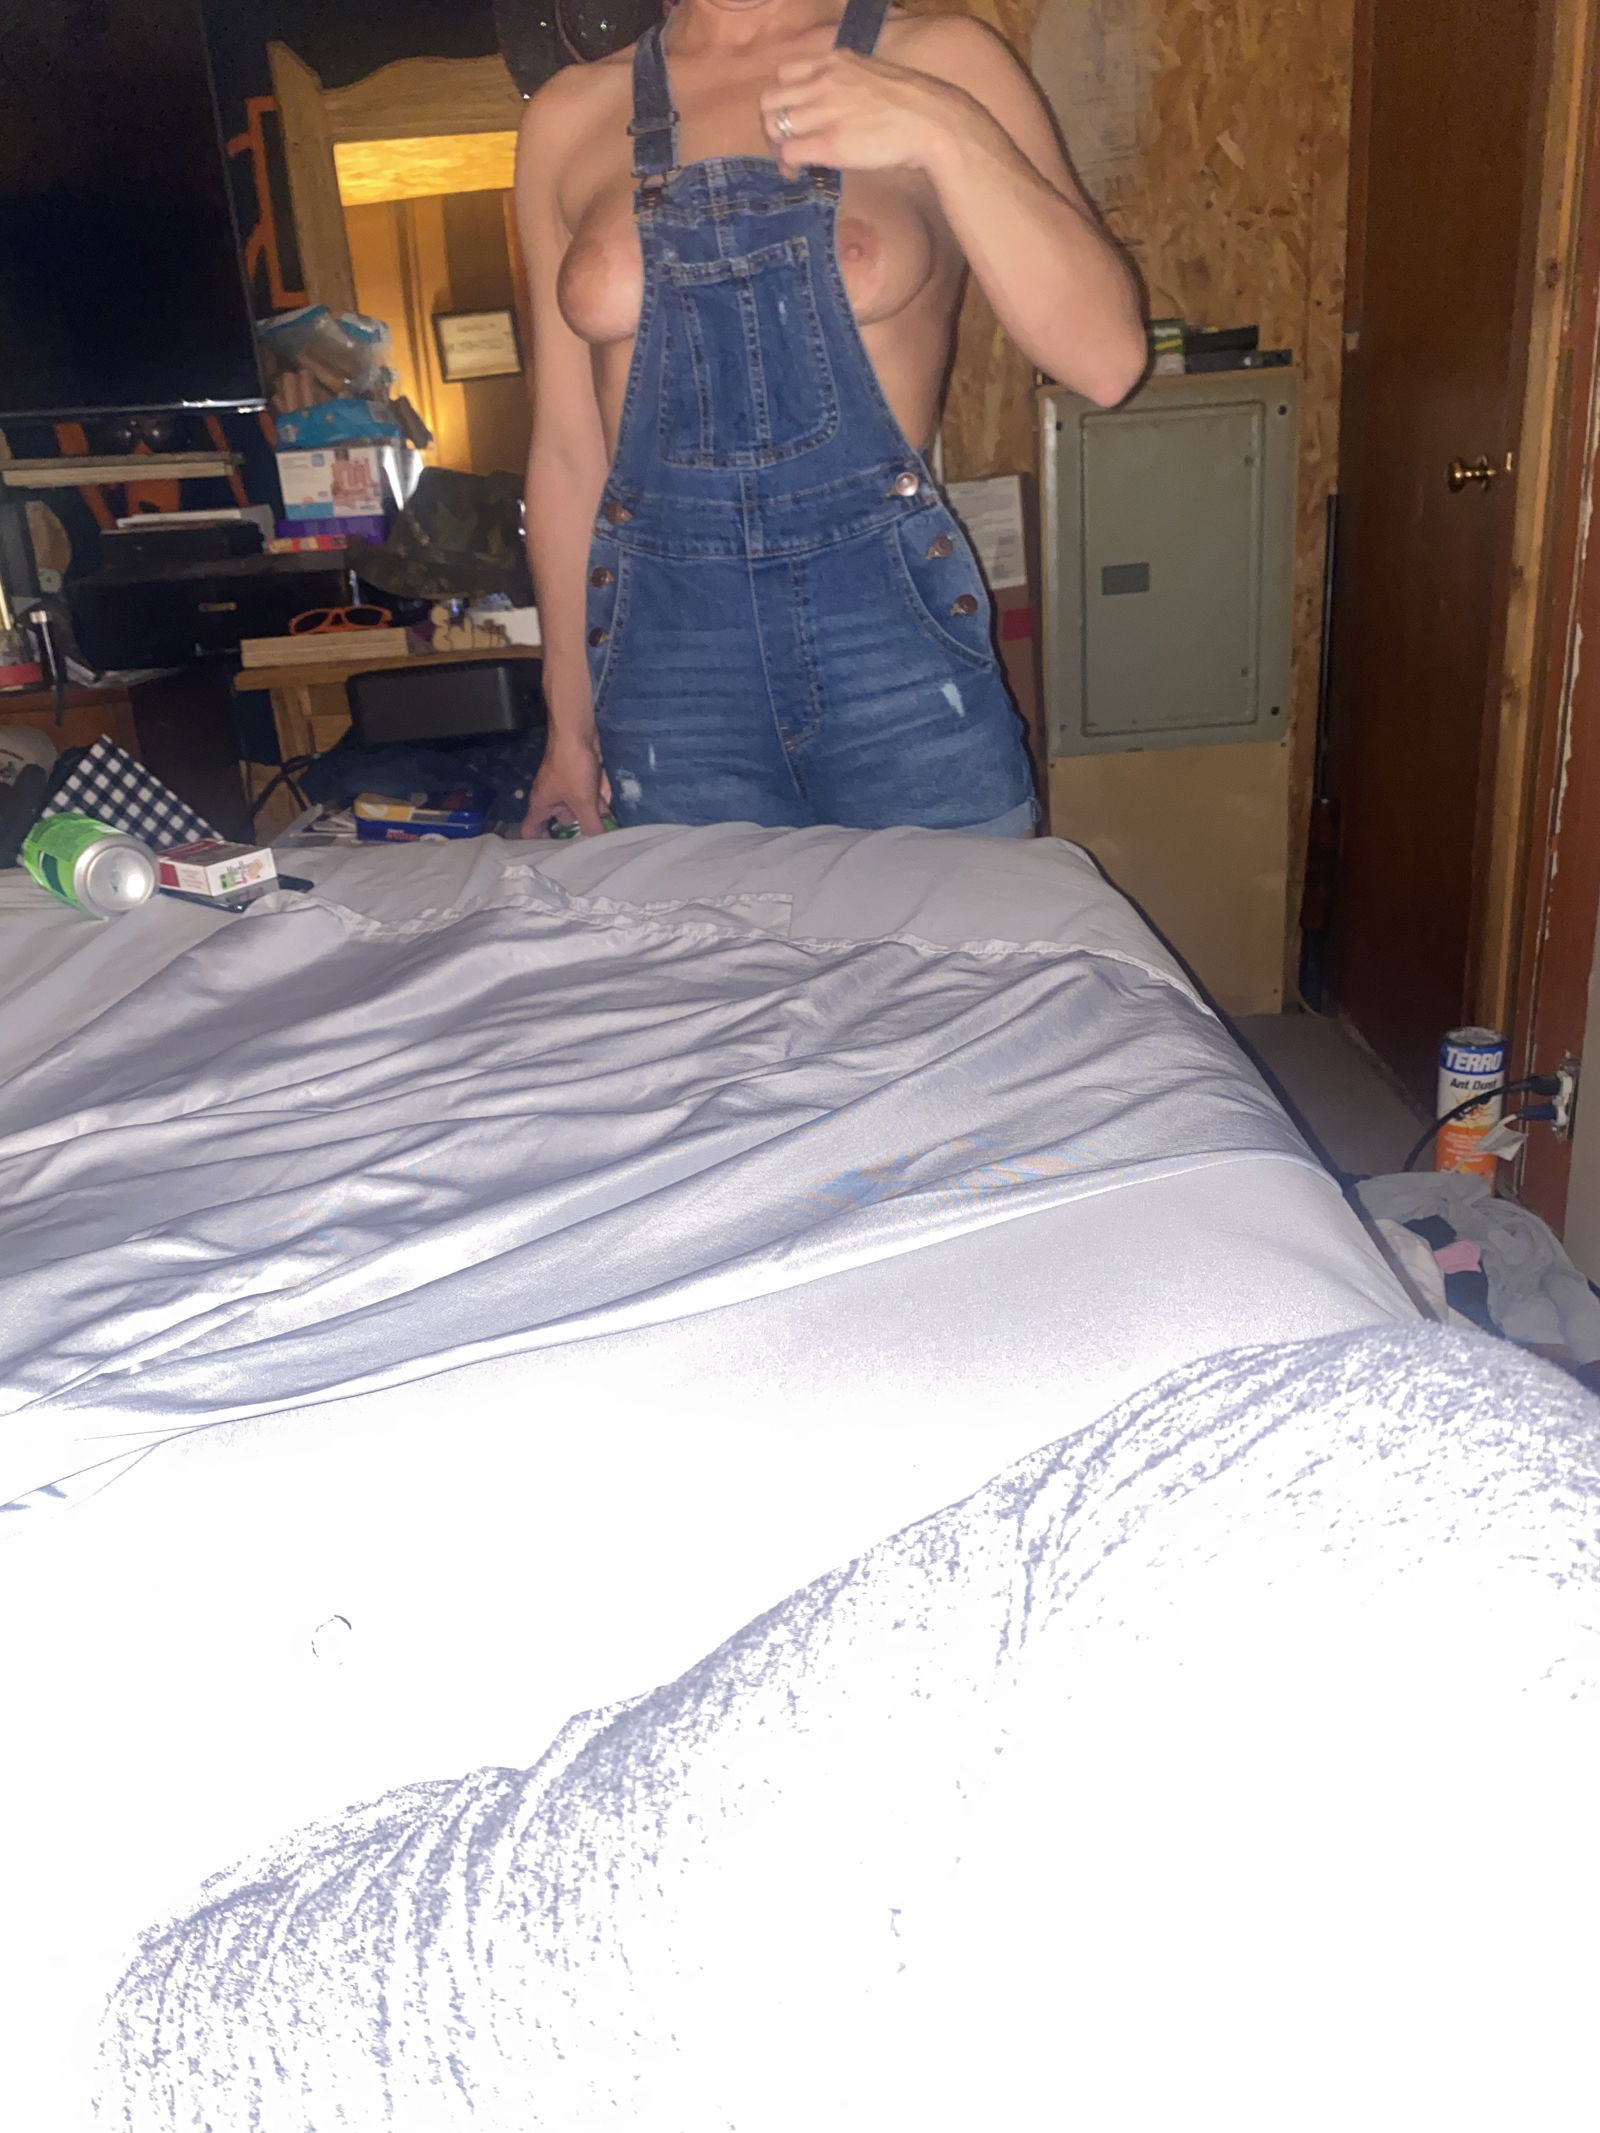 Photo by eddieplayswithannie with the username @eddieplayswithannie, who is a verified user,  May 2, 2022 at 7:26 PM. The post is about the topic Real Couples and the text says 'Annie got new overalls and caused hard feelins'